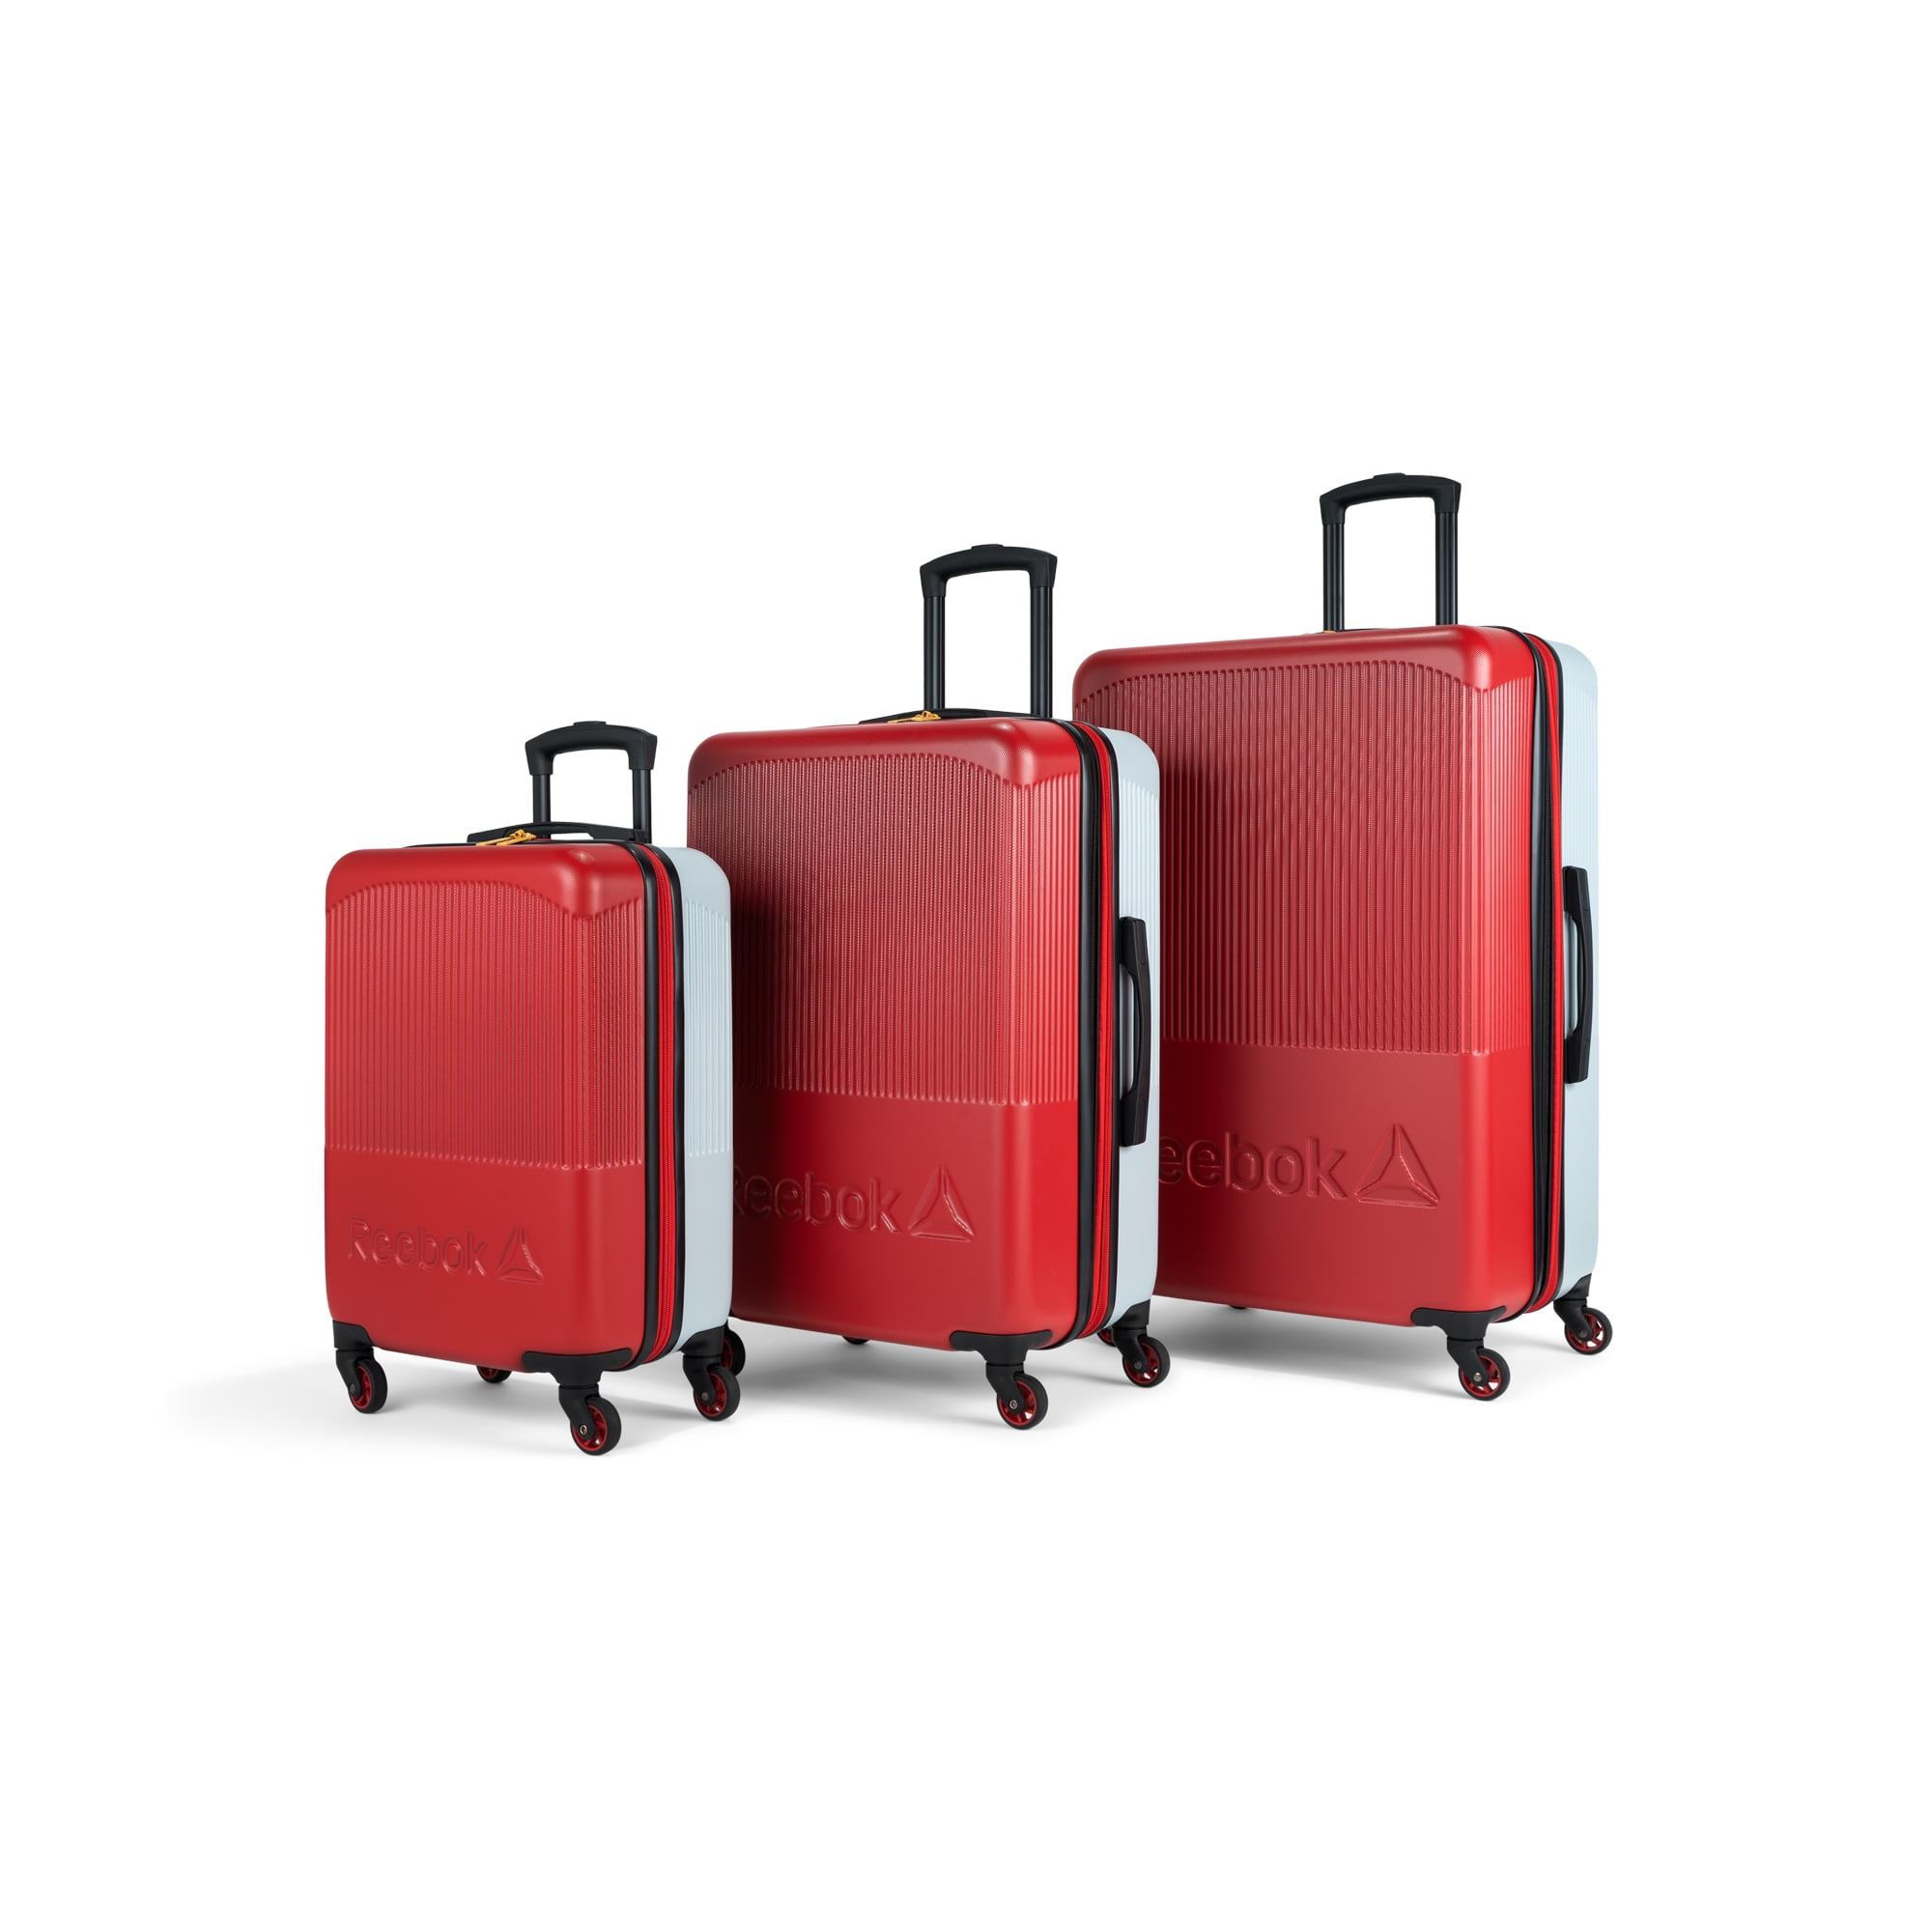 Reebok - Time Out Collection - 3 Piece Hardside Luggage Set - ABS/PC ...